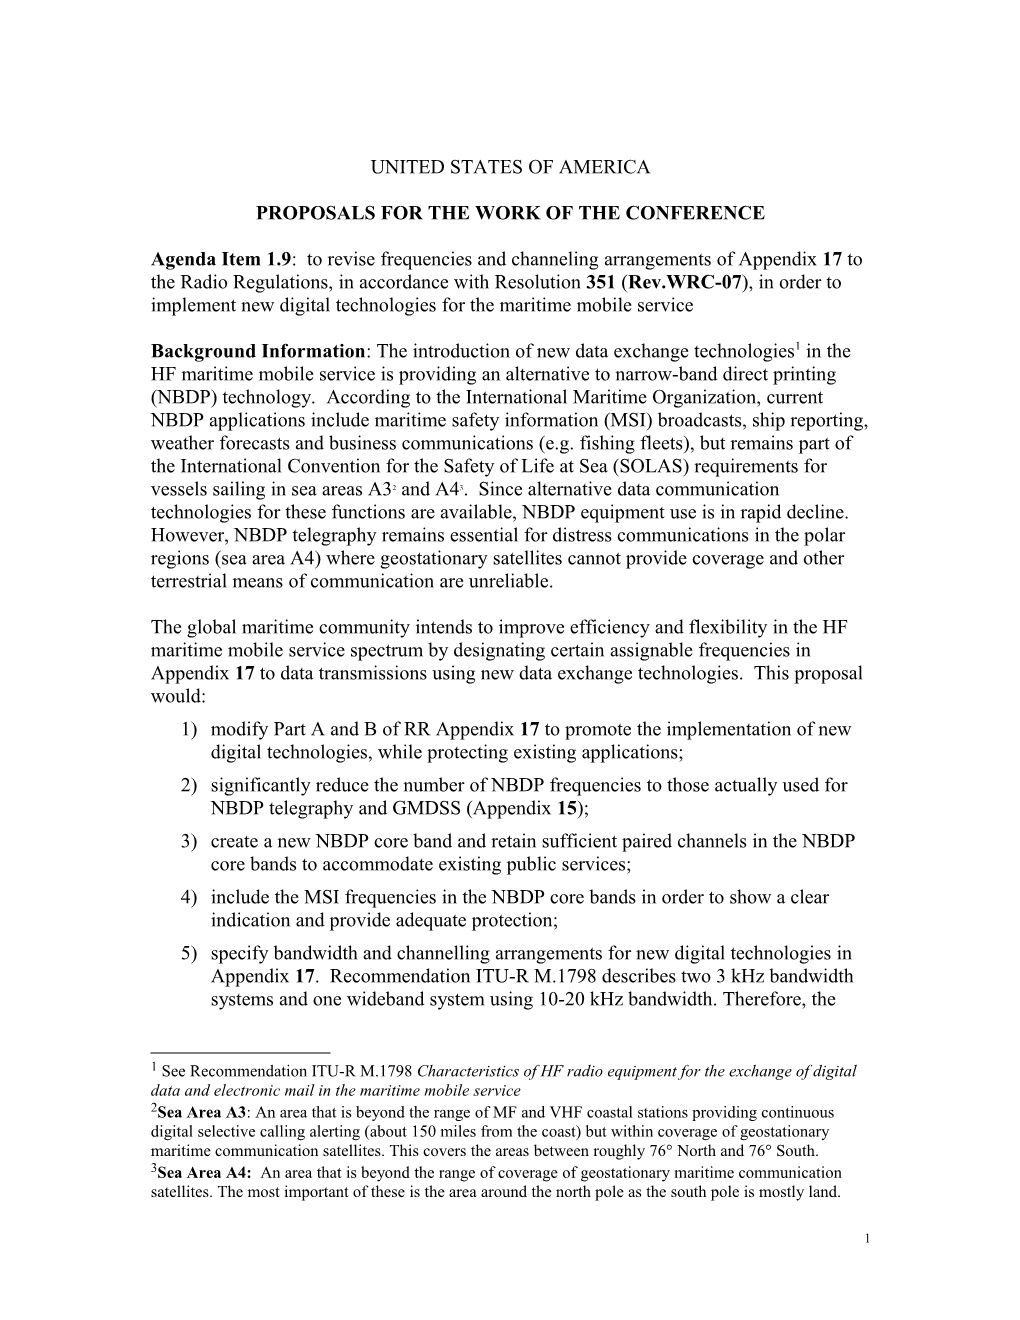 Proposals for the Work of the Conference s1